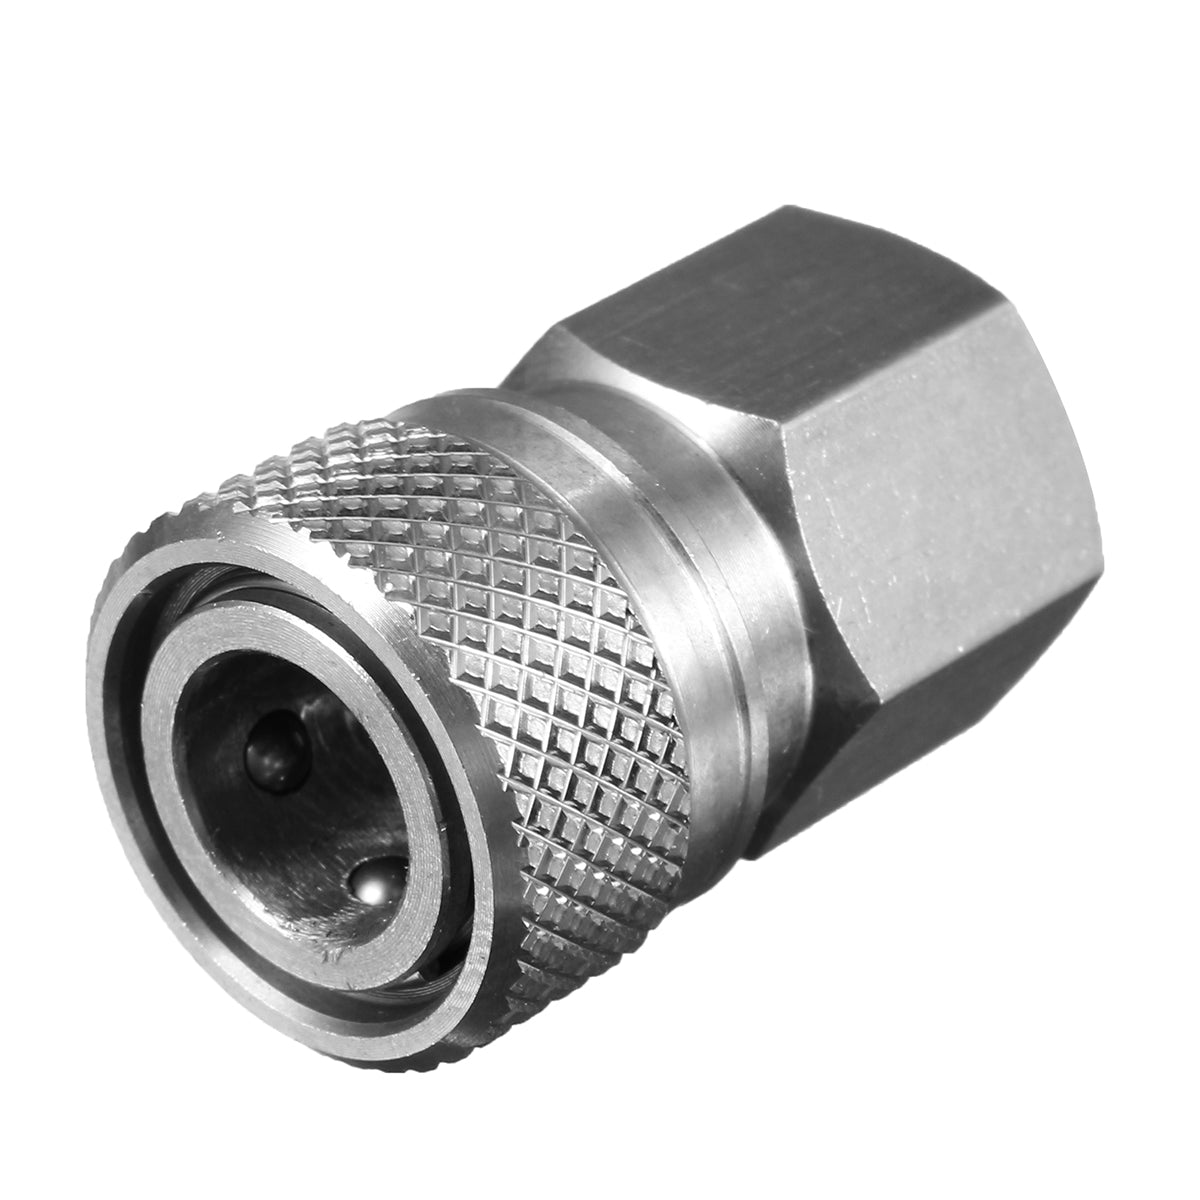 Gray Paintball PCP 1/8 NPT Stainless Steel Female Connector Quick Disconnect Adapter